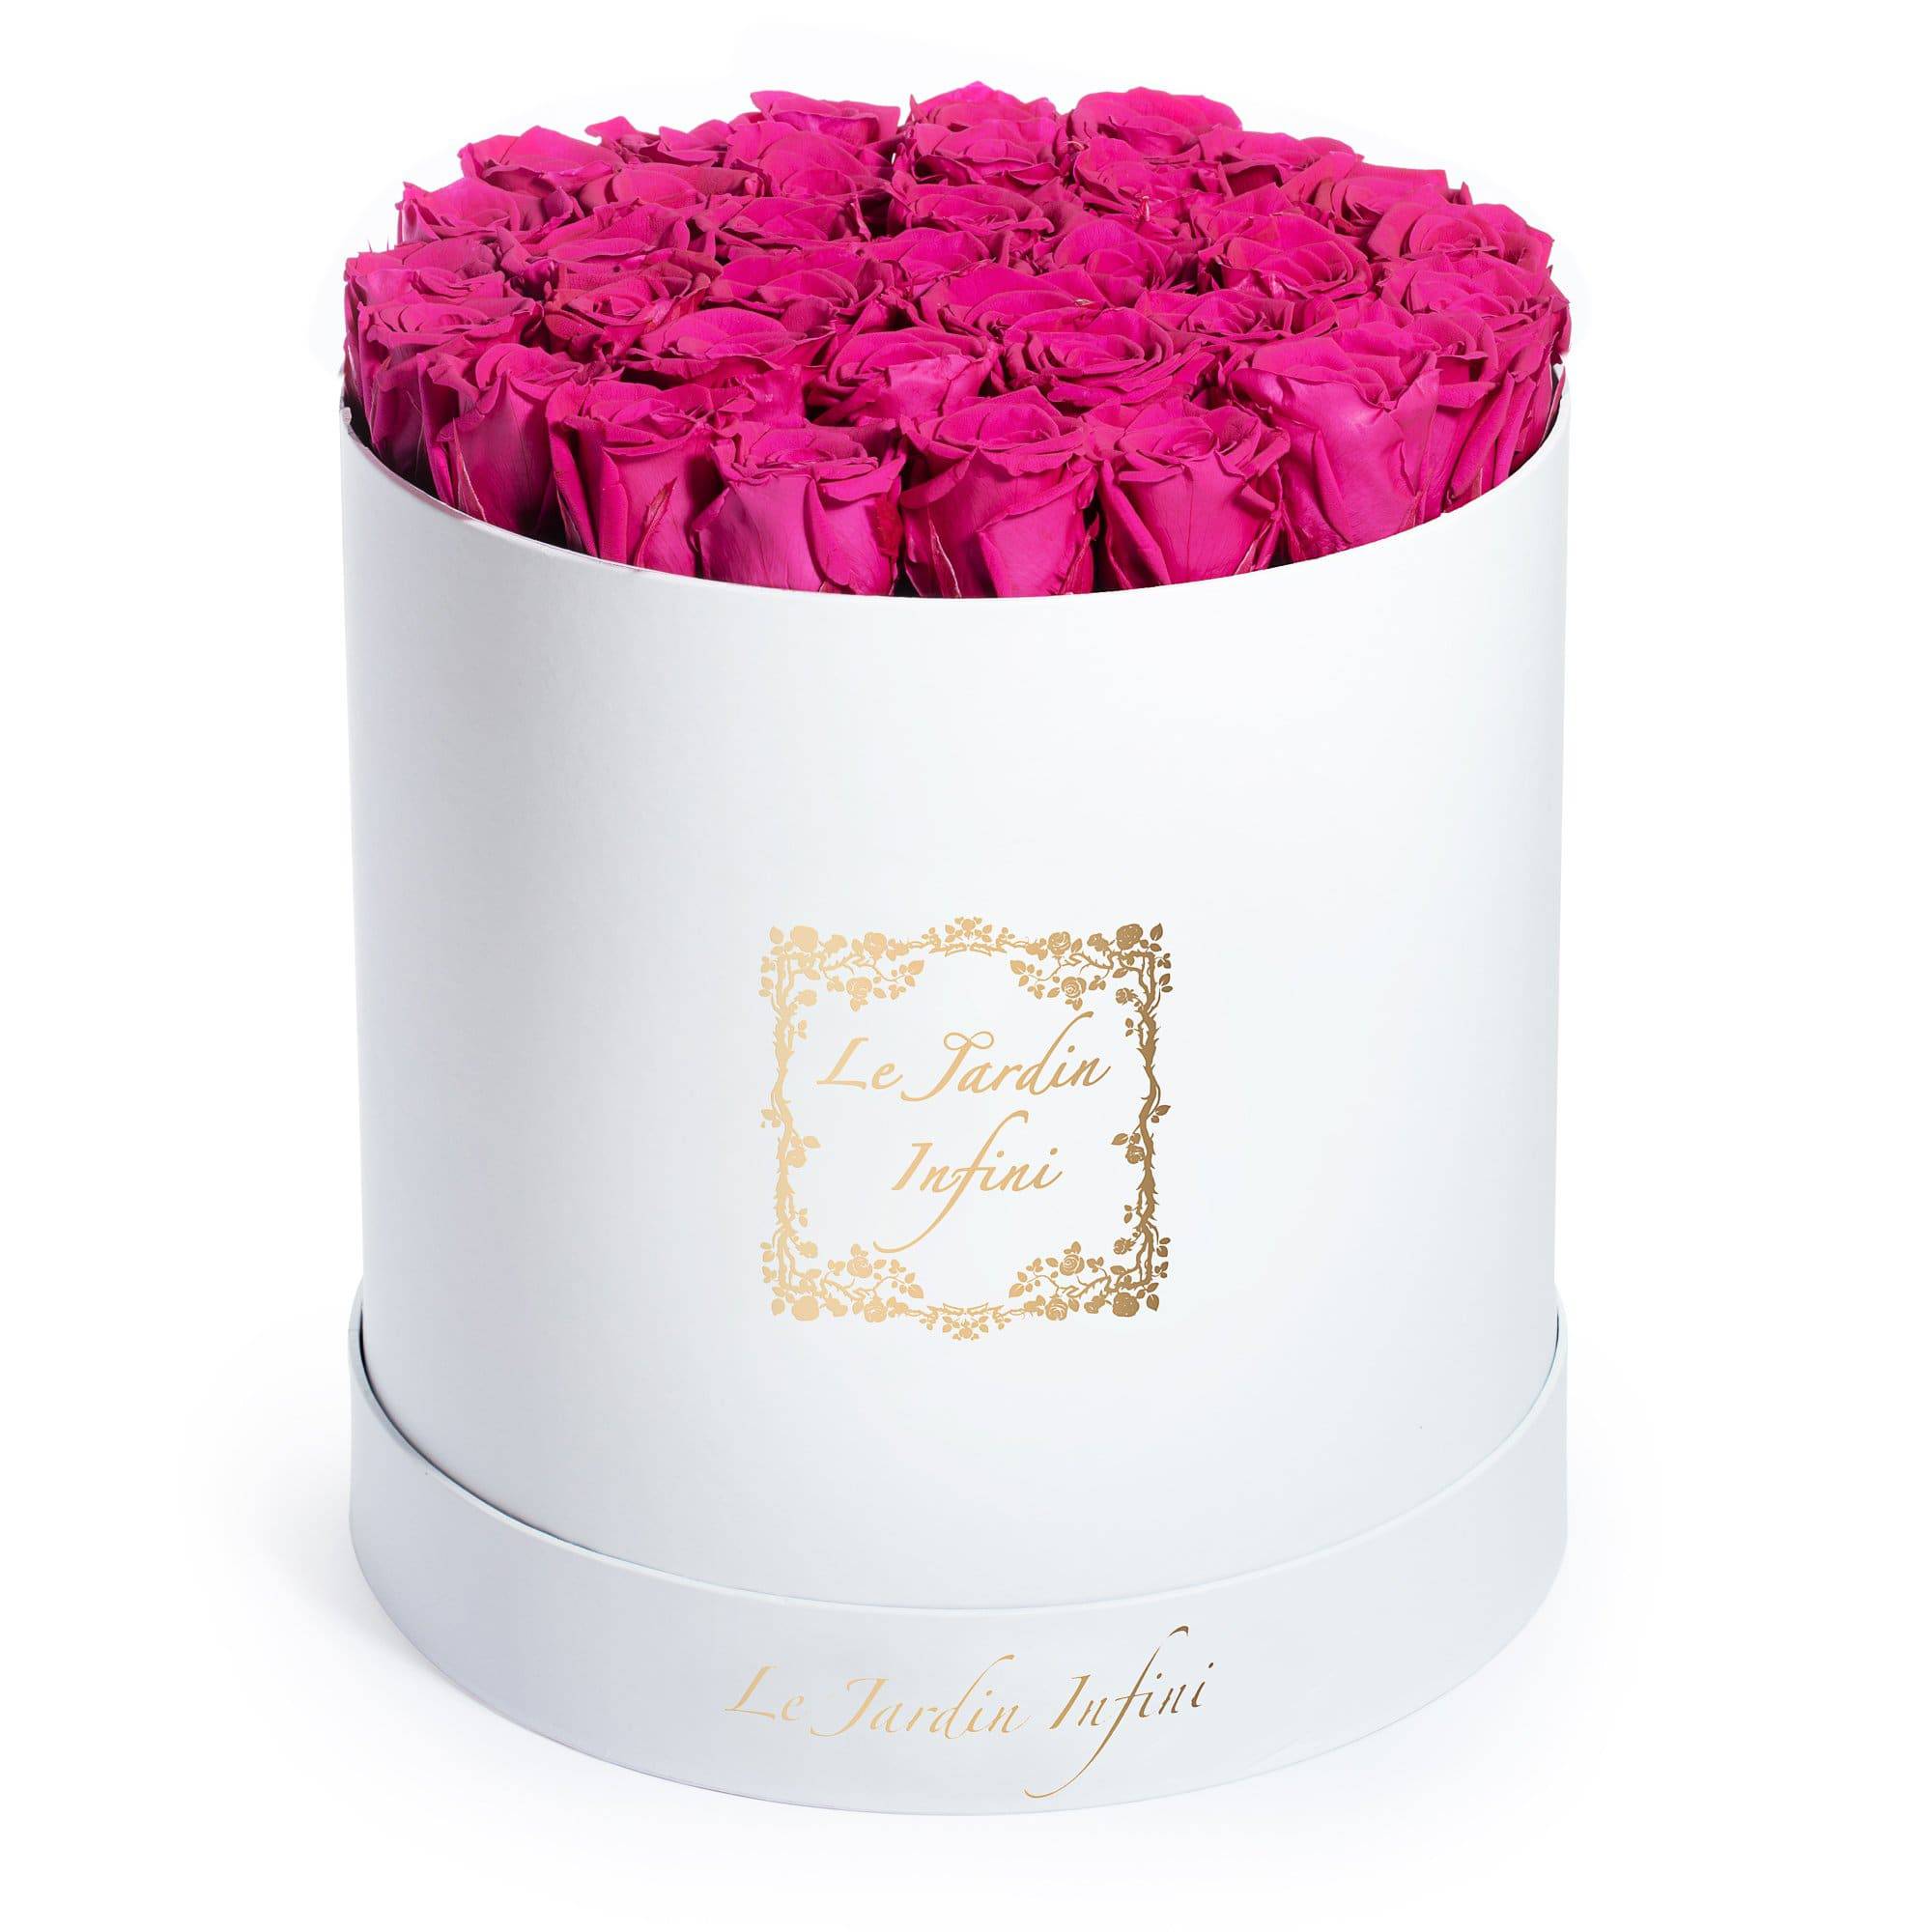 Hot Pink Preserved Roses - Large Round White Box